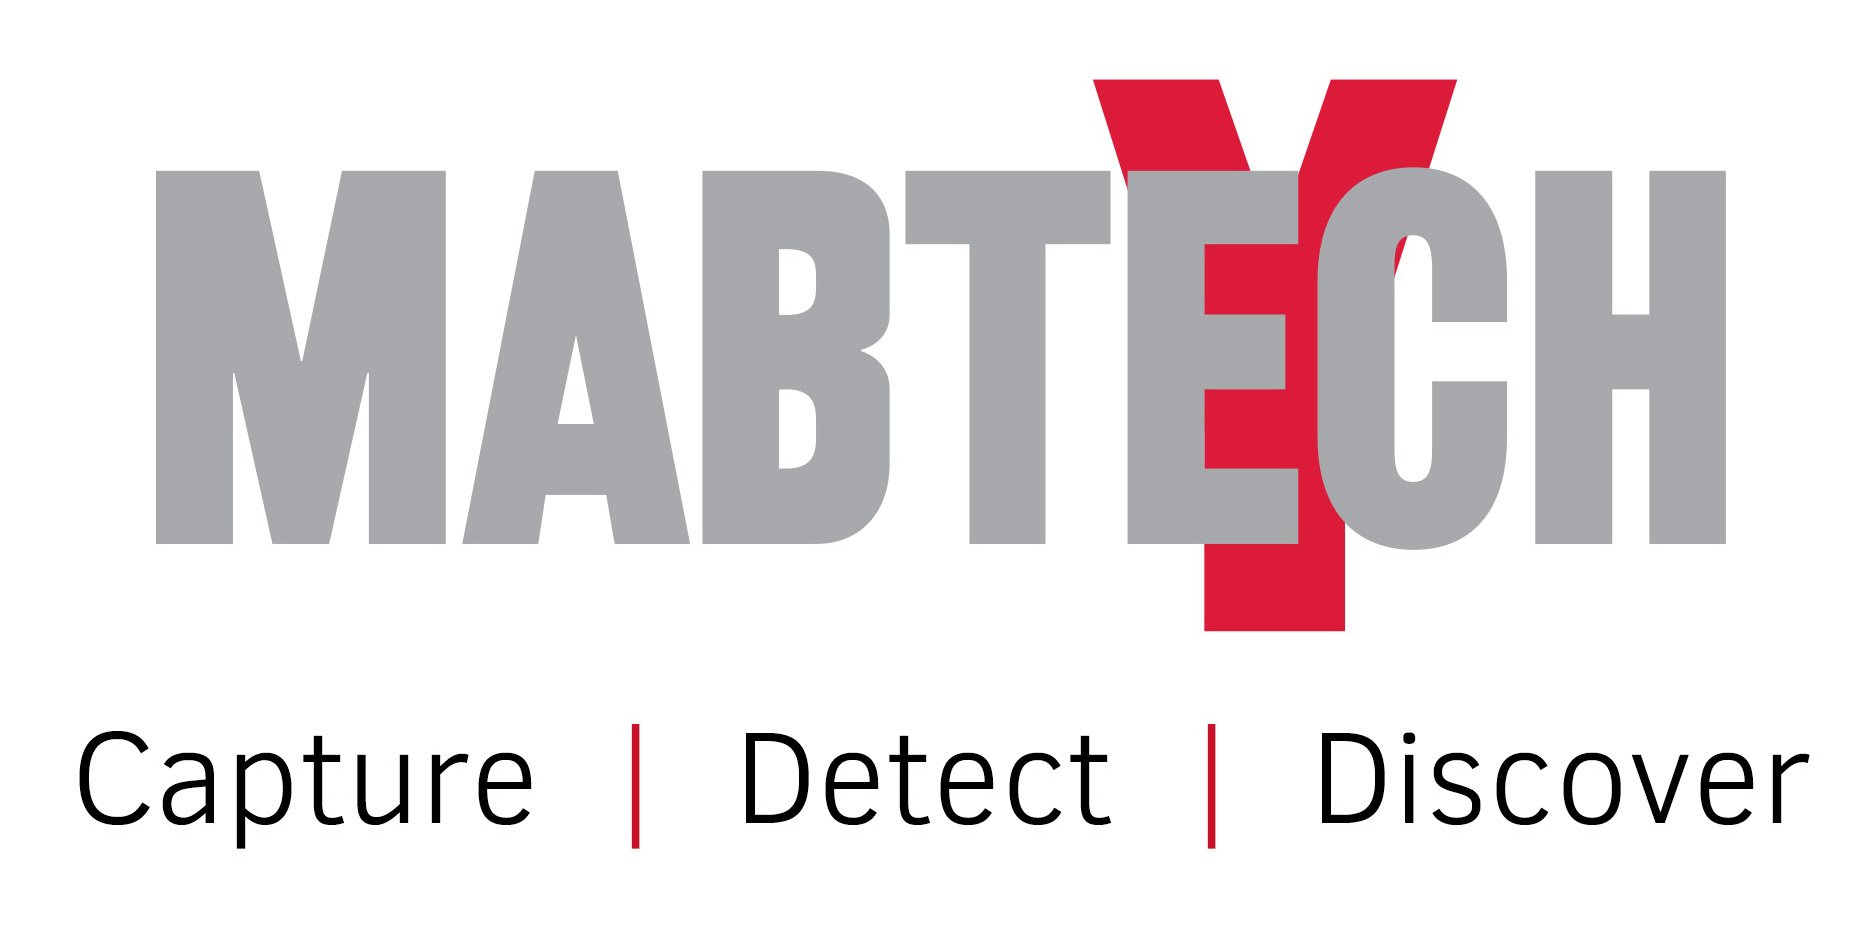  MABTECH Y CAPTURE DETECT DISCOVER